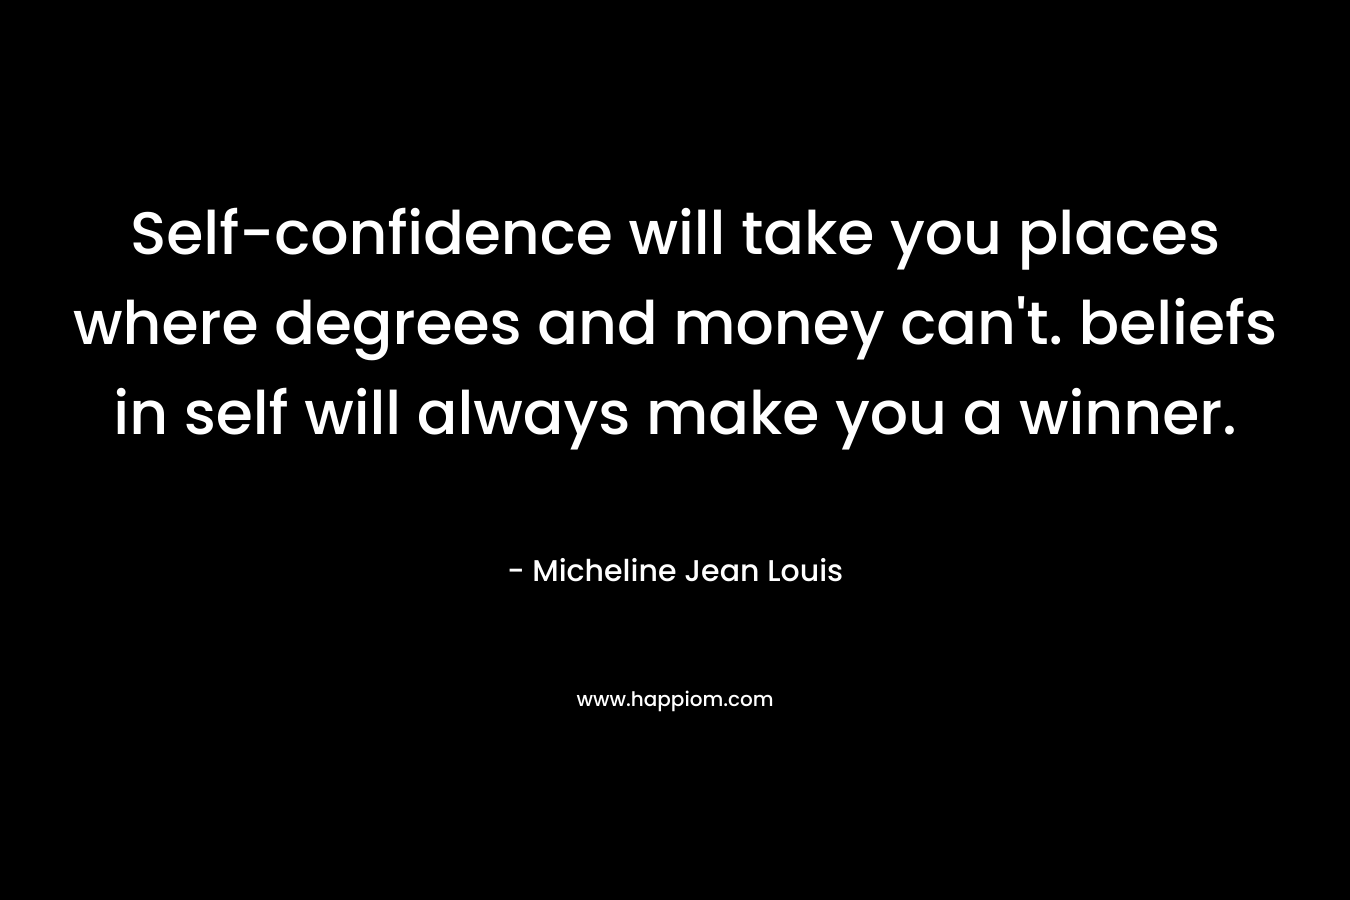 Self-confidence will take you places where degrees and money can't. beliefs in self will always make you a winner.